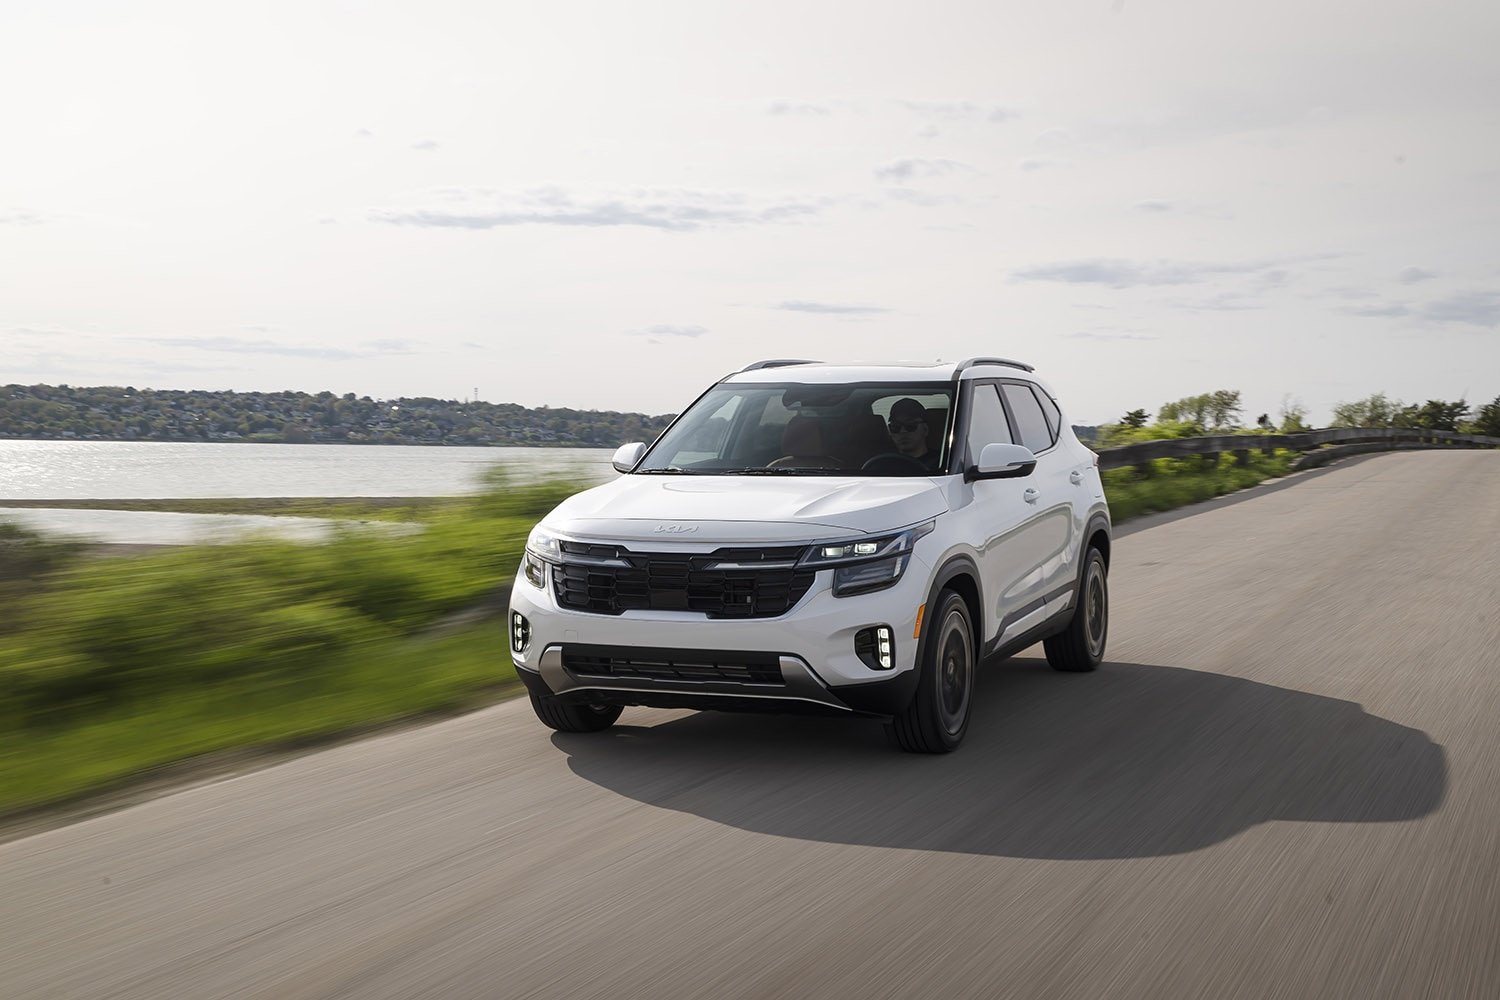 2024 Kia Seltos in white driving on a paved road beside grass and water.